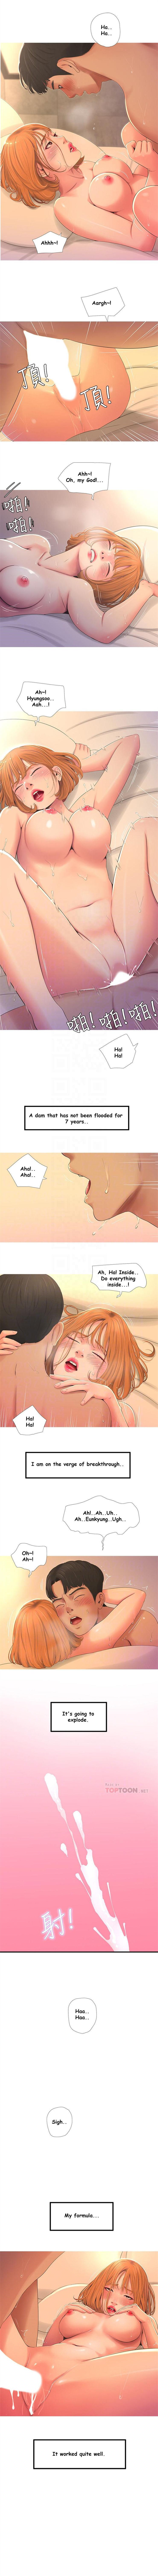 Doctor Sex One's In-Laws Virgins Chapter 1-12 (Ongoing) [English] Gay Averagedick - Page 13